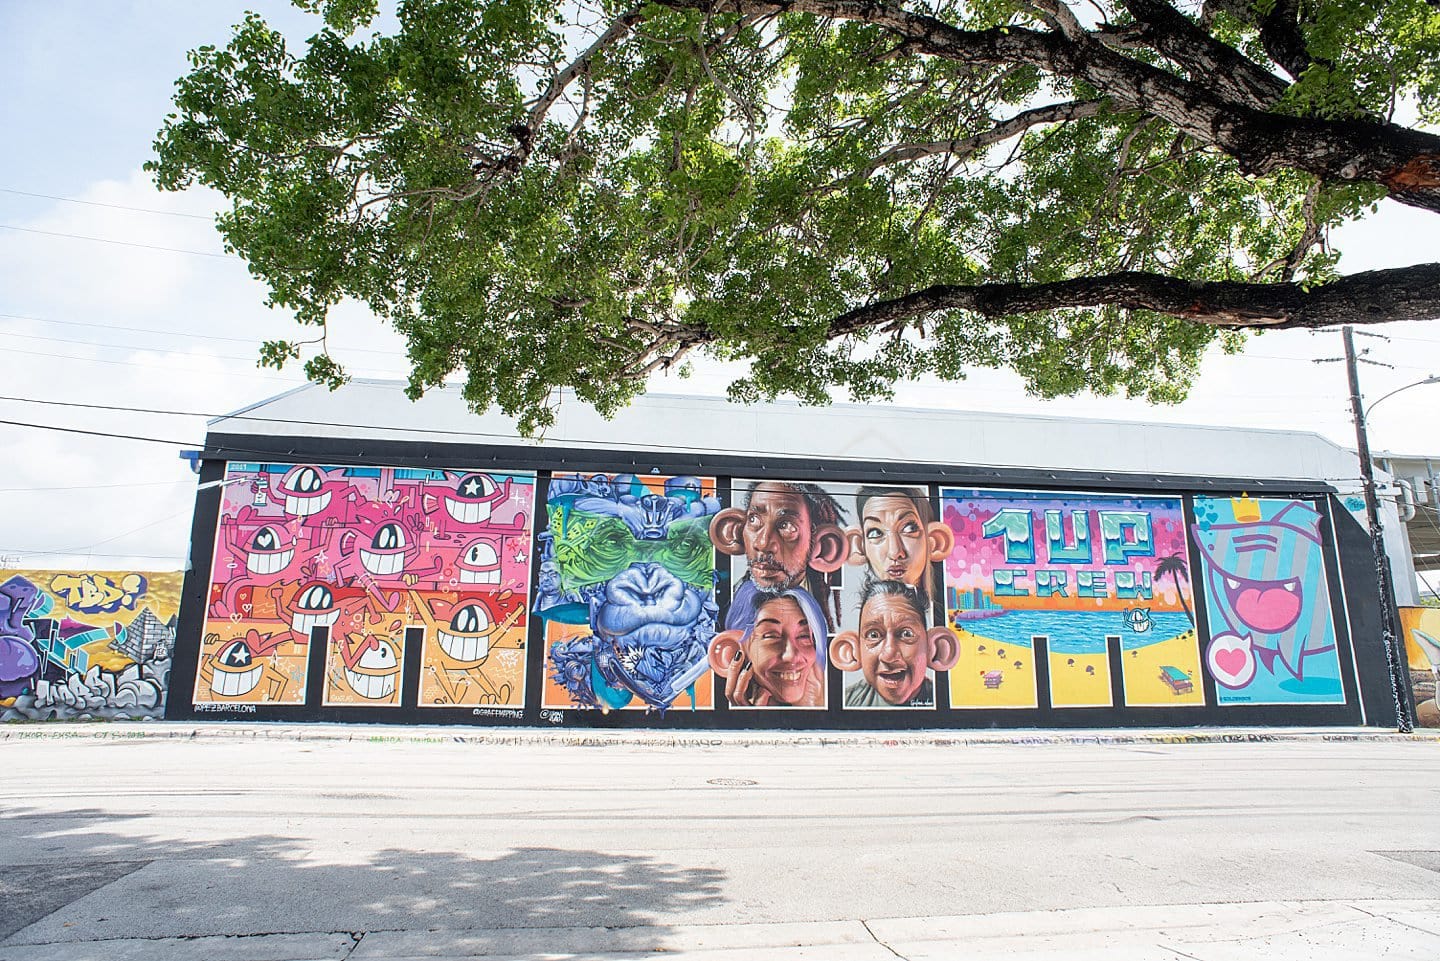 Fun things to do in Wynwood on Sometimes Home travel blog. Click through for all the information on this popular neighborhood in Miami, Florida.